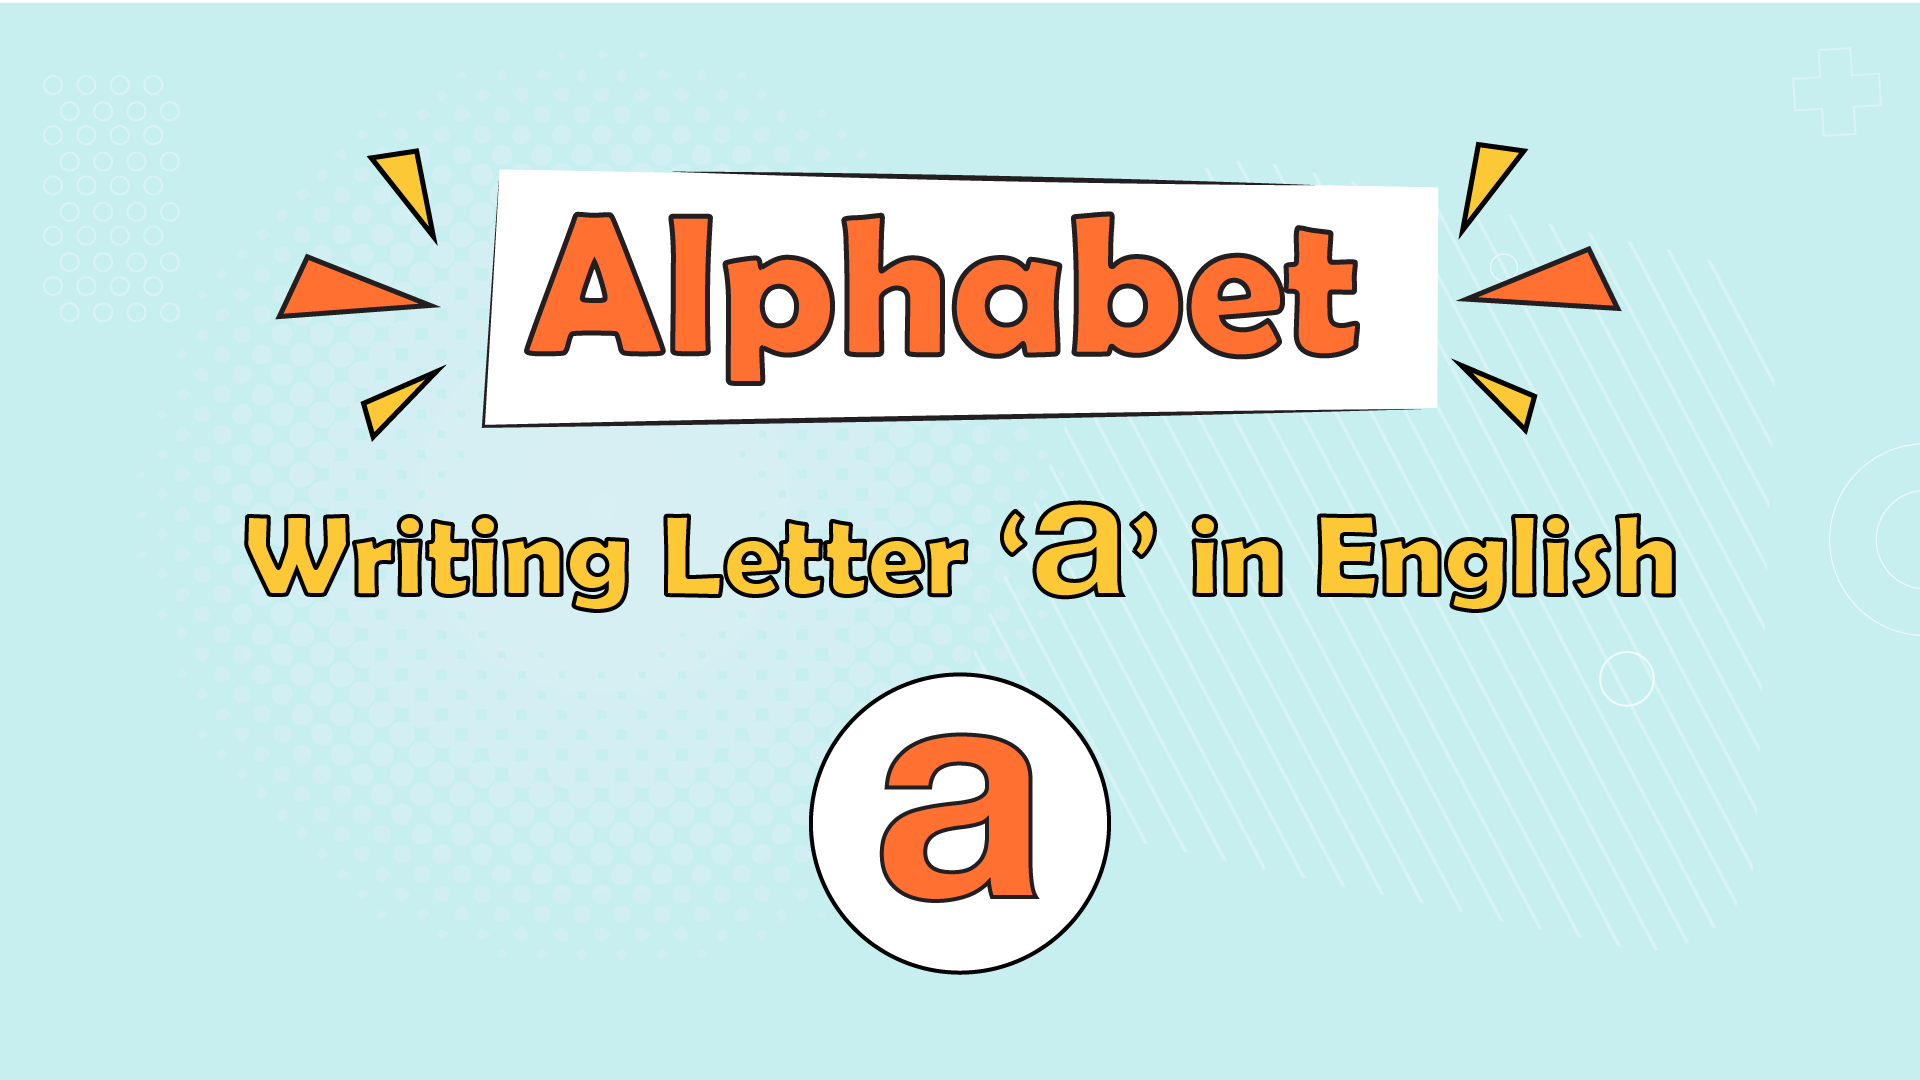 Alphabet – Writing Letter ‘a’ in English